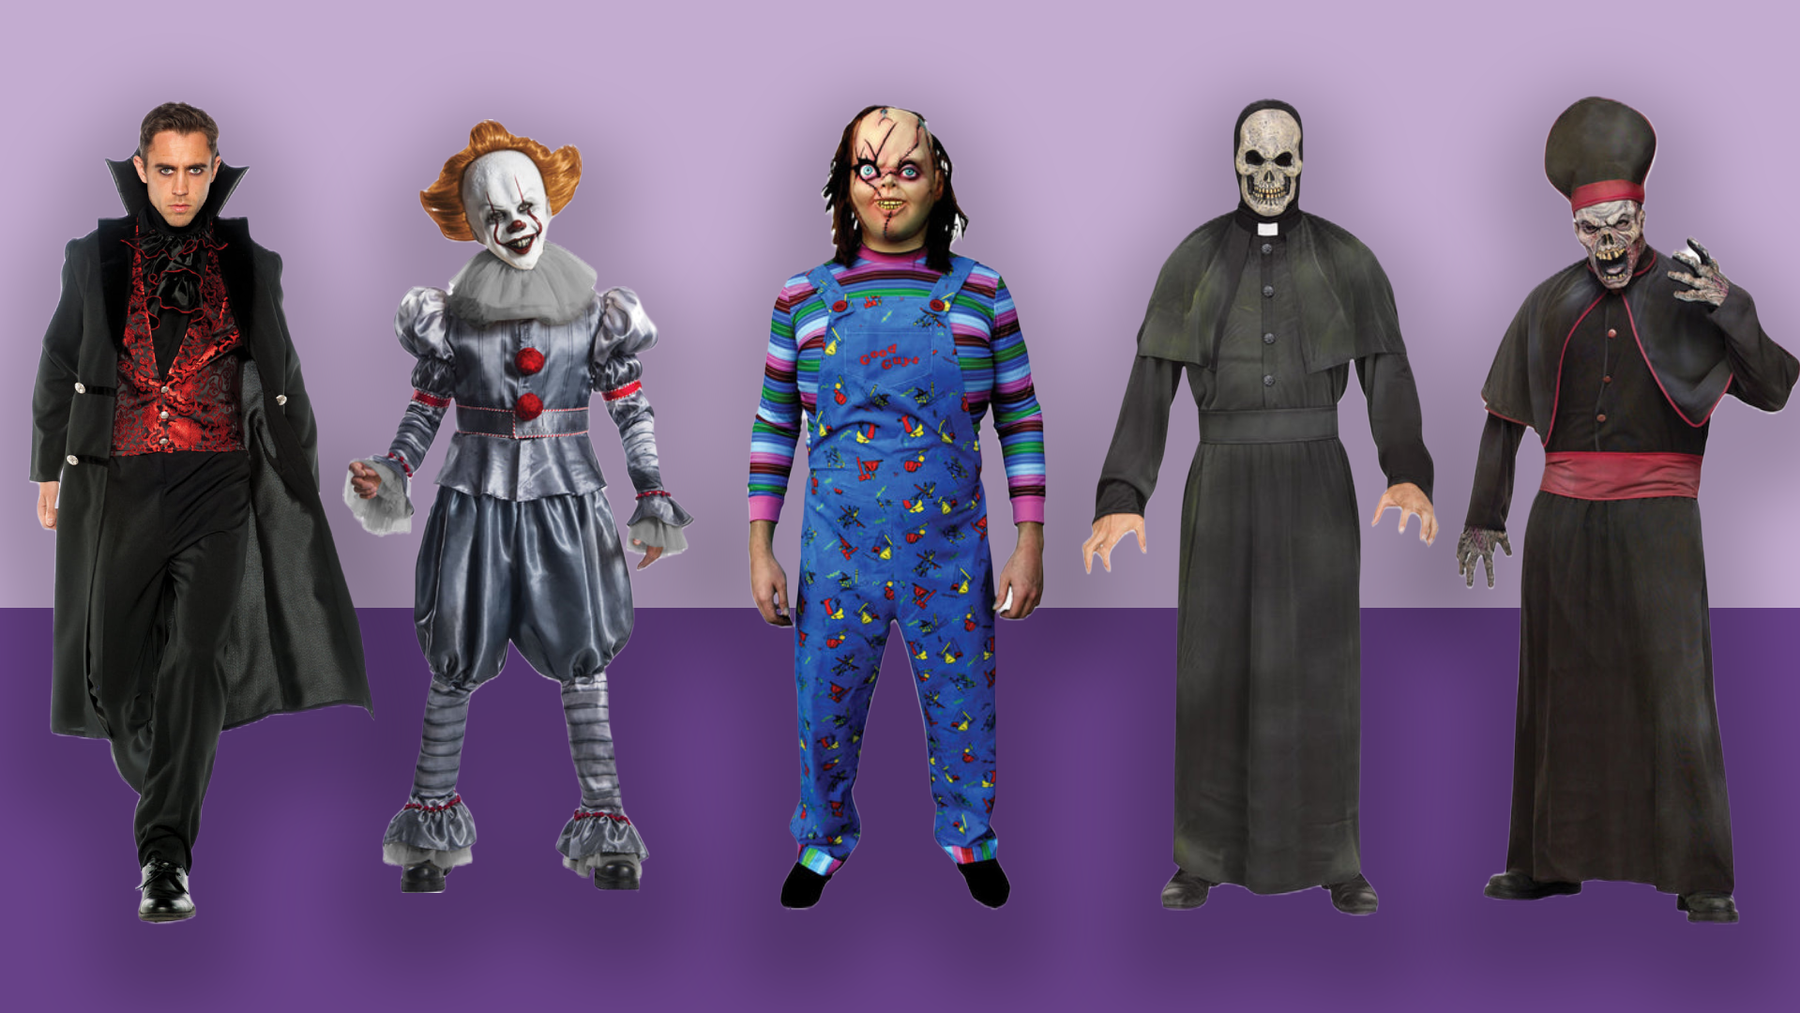 Halloween Havoc: Top 5 Men's Costume Trends for the Spookiest Night of the Year